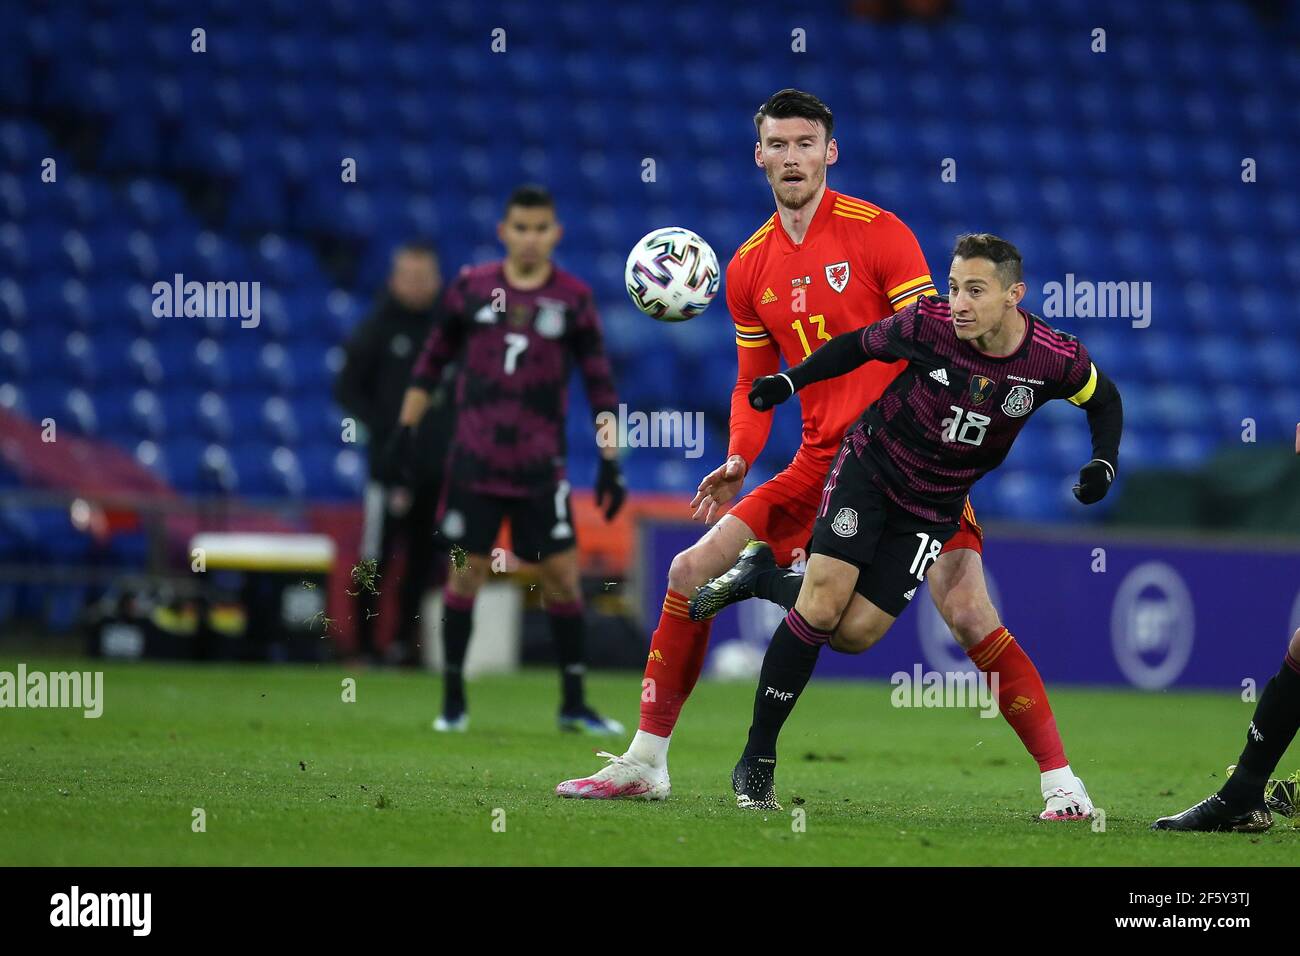 Cardiff, UK. 27th Mar, 2021. Andres Guardado of Mexico (r) and Kieffer Moore of Wales (c) in action. Football international friendly match, Wales v Mexico, at the Cardiff city stadium in Cardiff, South Wales on Saturday 27th March 2021. Editorial use only. pic by Andrew Orchard/Andrew Orchard sports photography/Alamy Live News Credit: Andrew Orchard sports photography/Alamy Live News Stock Photo